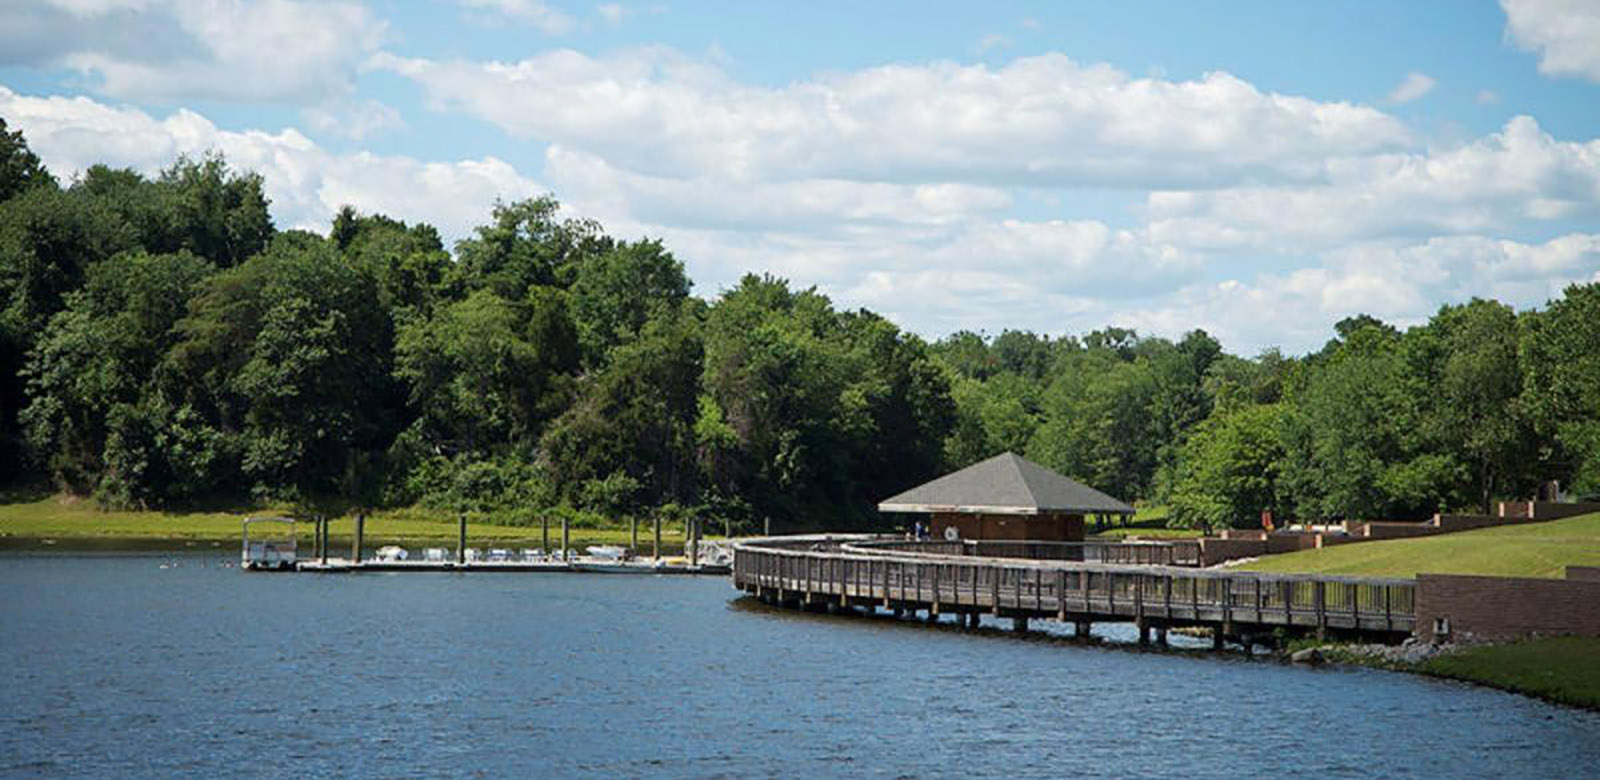 An image of Lake Fairfax with the pavilion and dock visible